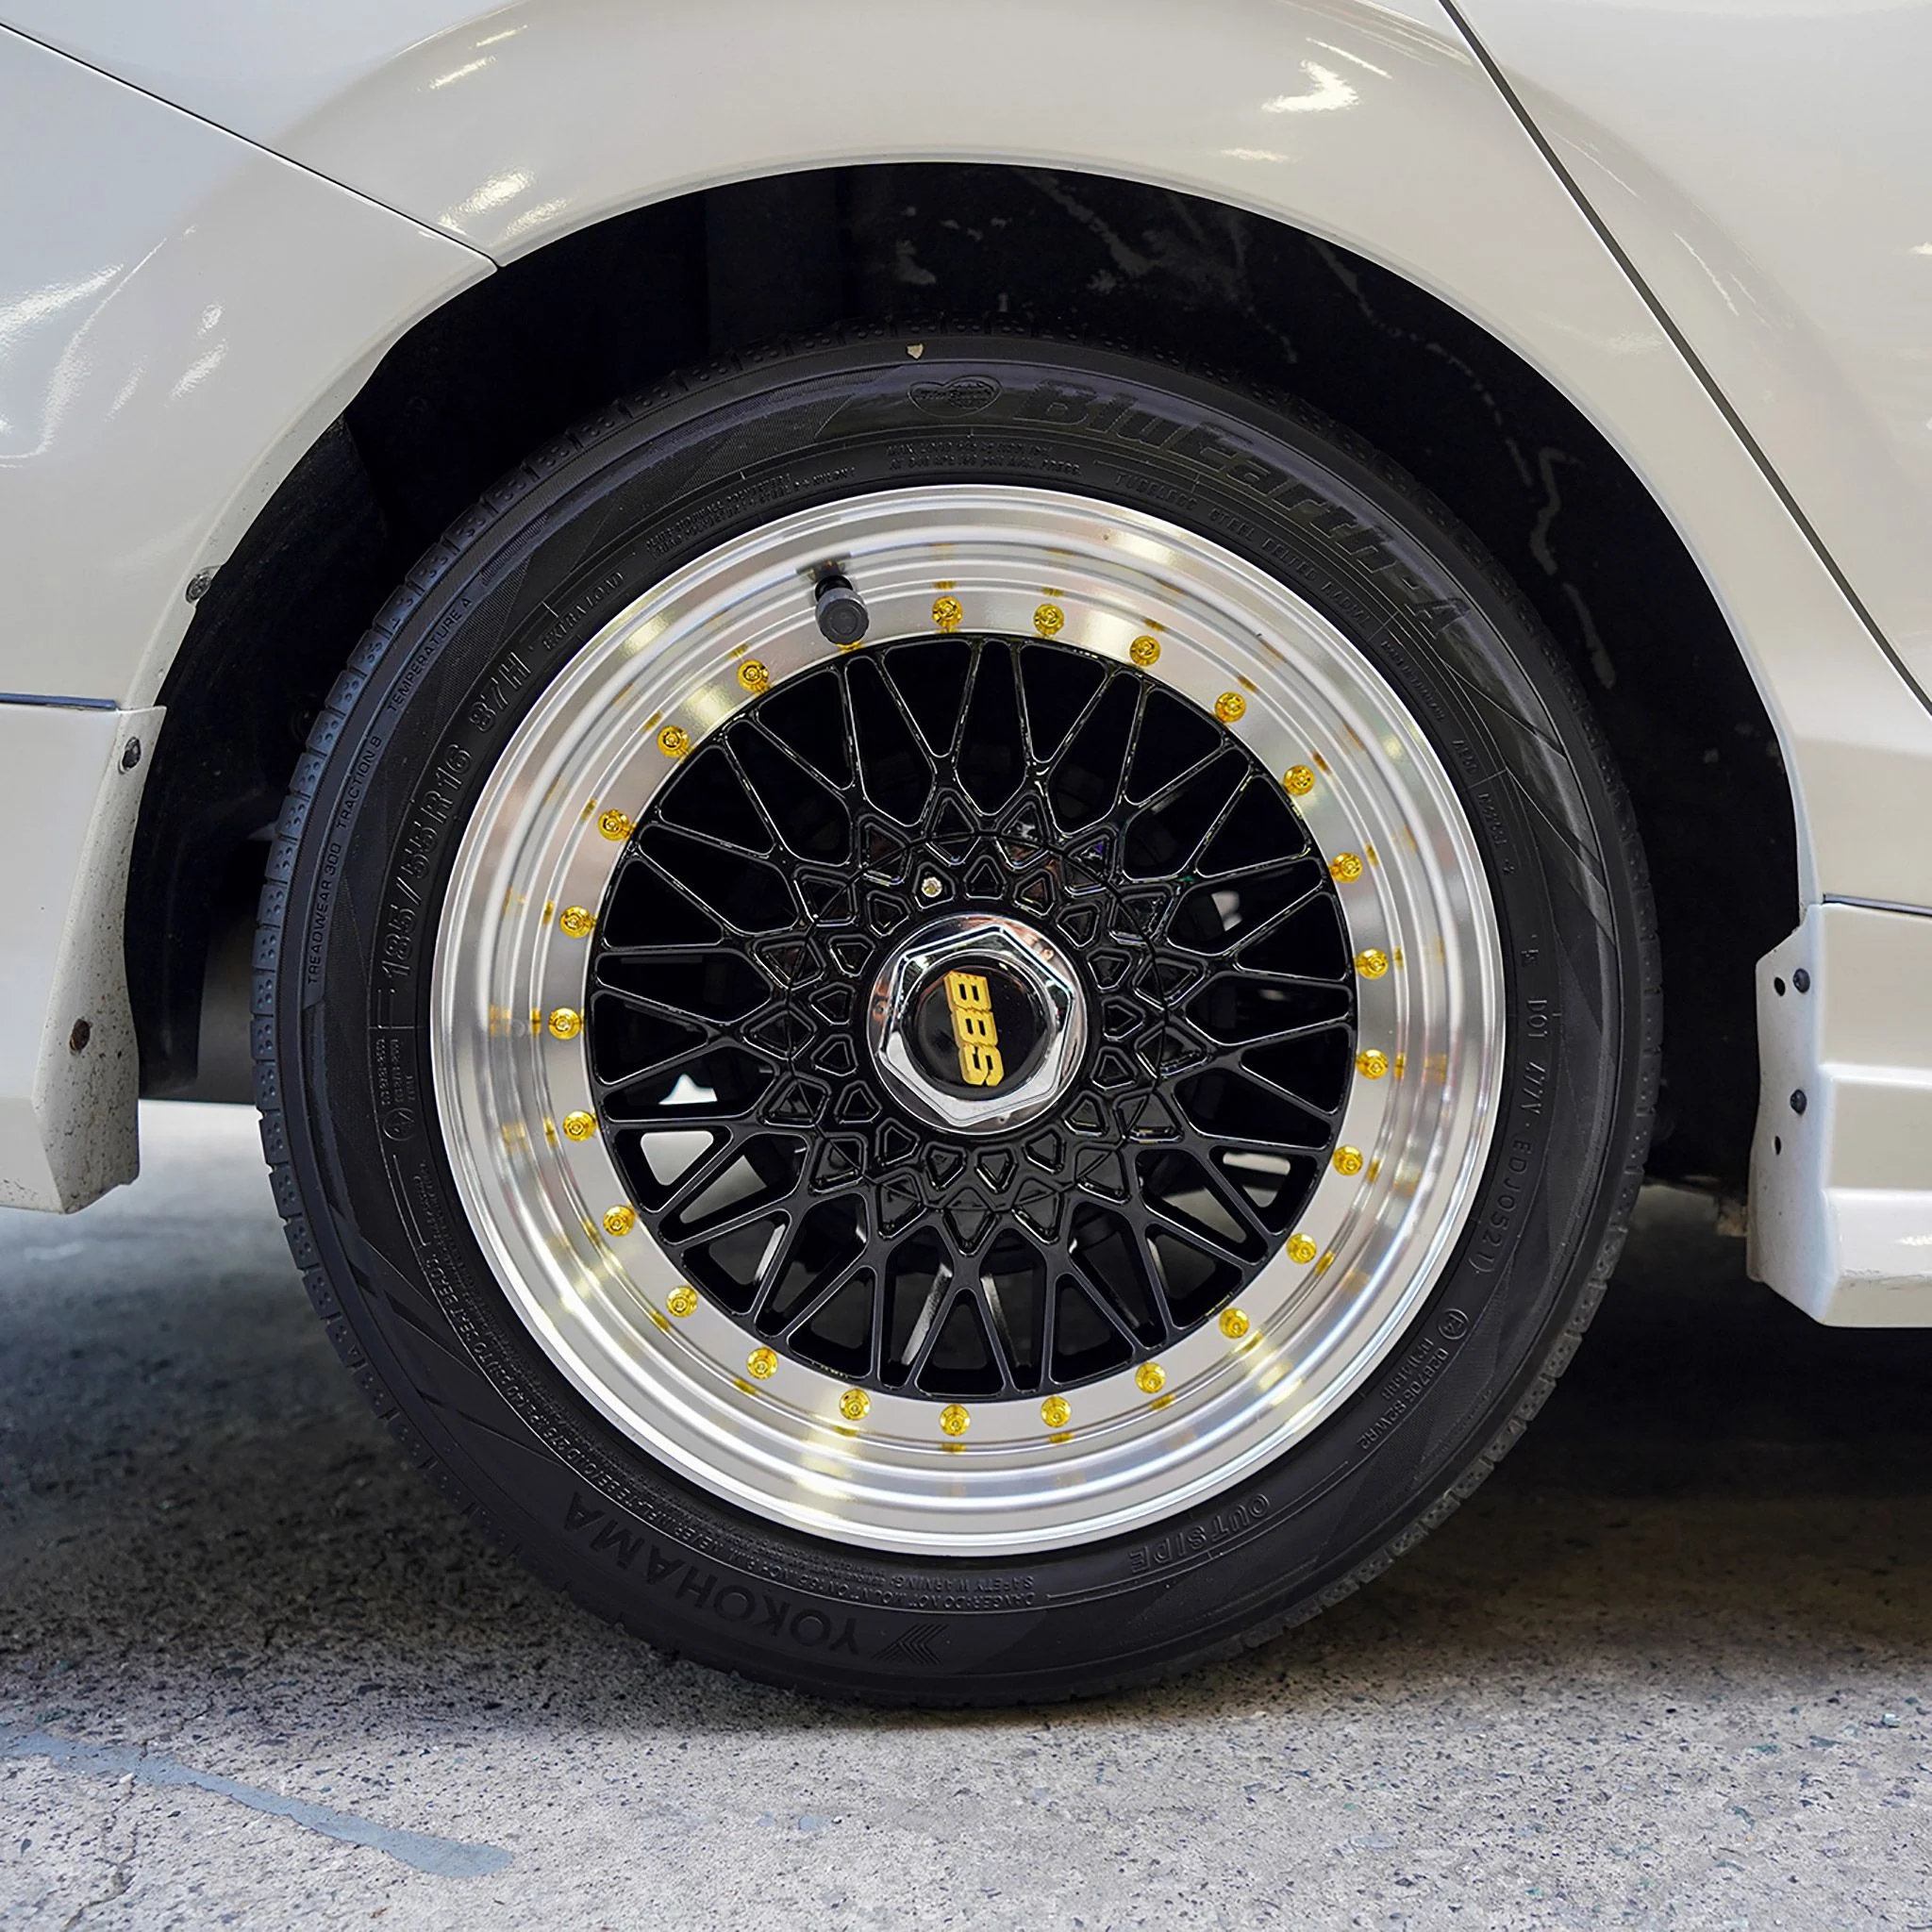 16 vs 17 Inch Wheels: Pros, Cons and What's Best for Your Vehicle